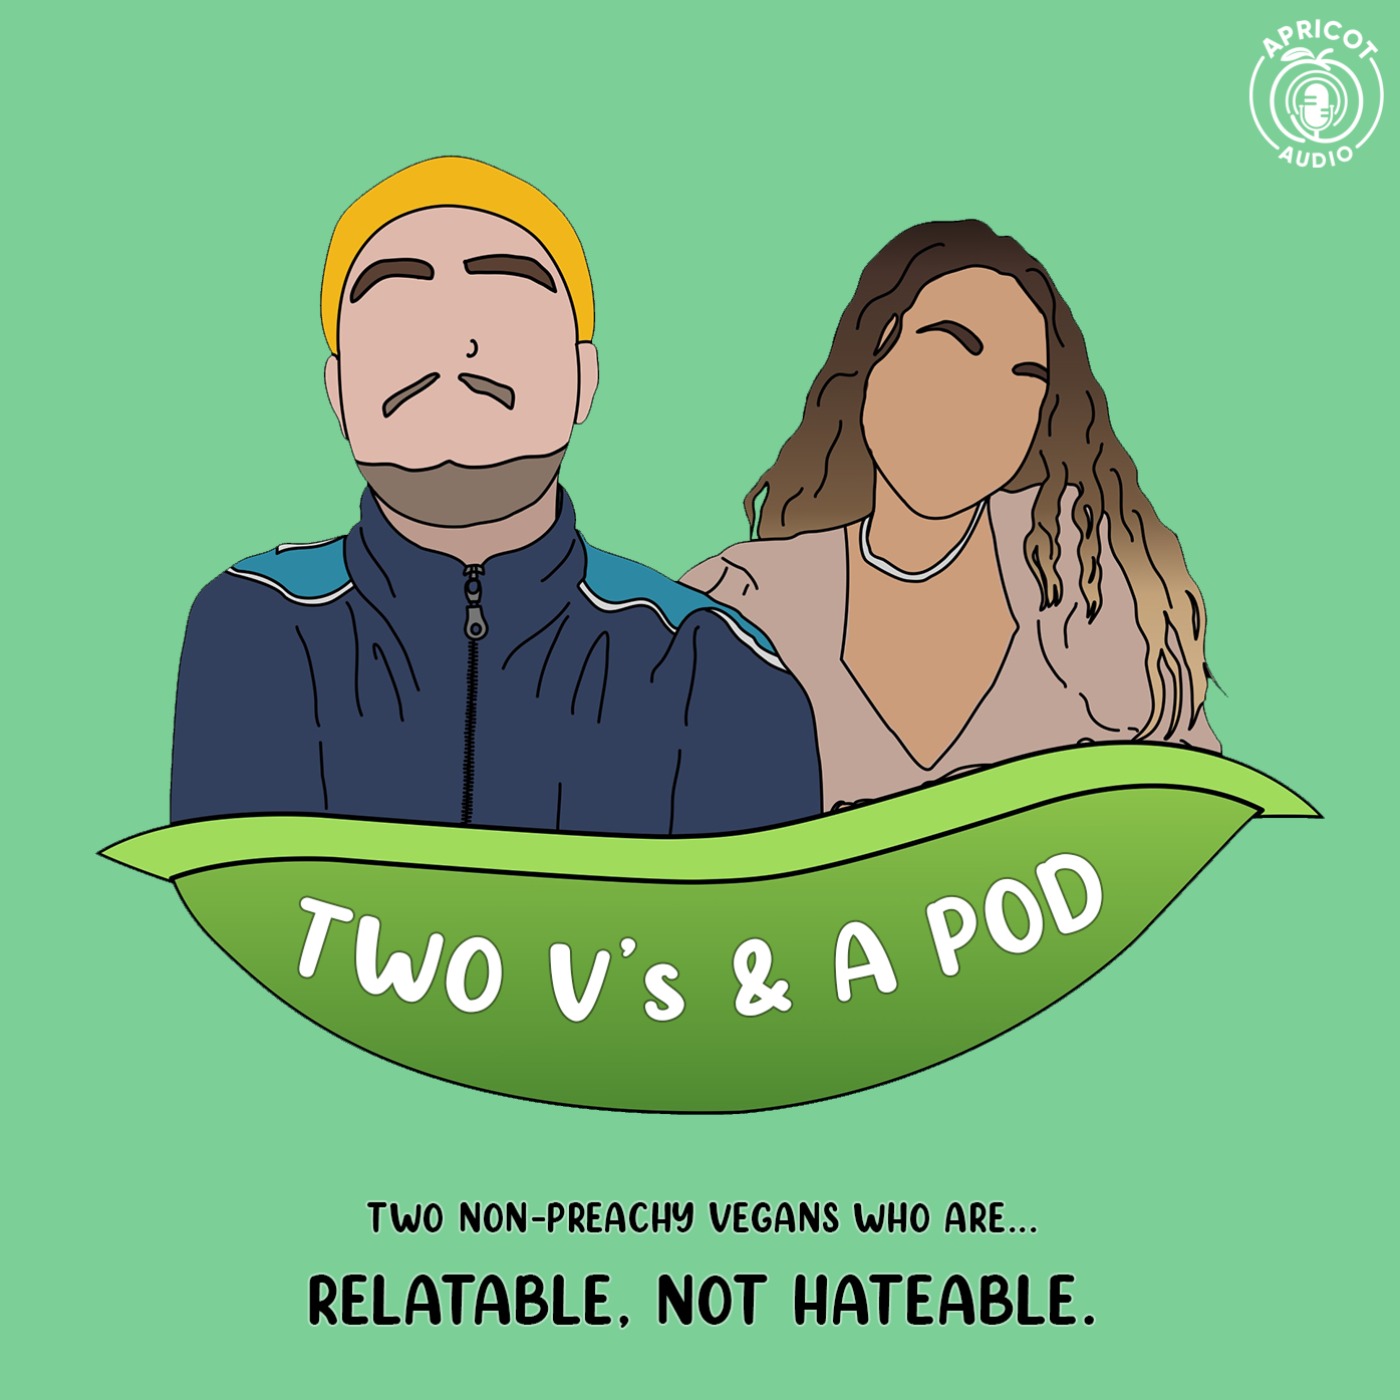 OFFICIAL TRAILER - Two V's & A Pod... COMING JANUARY 1st